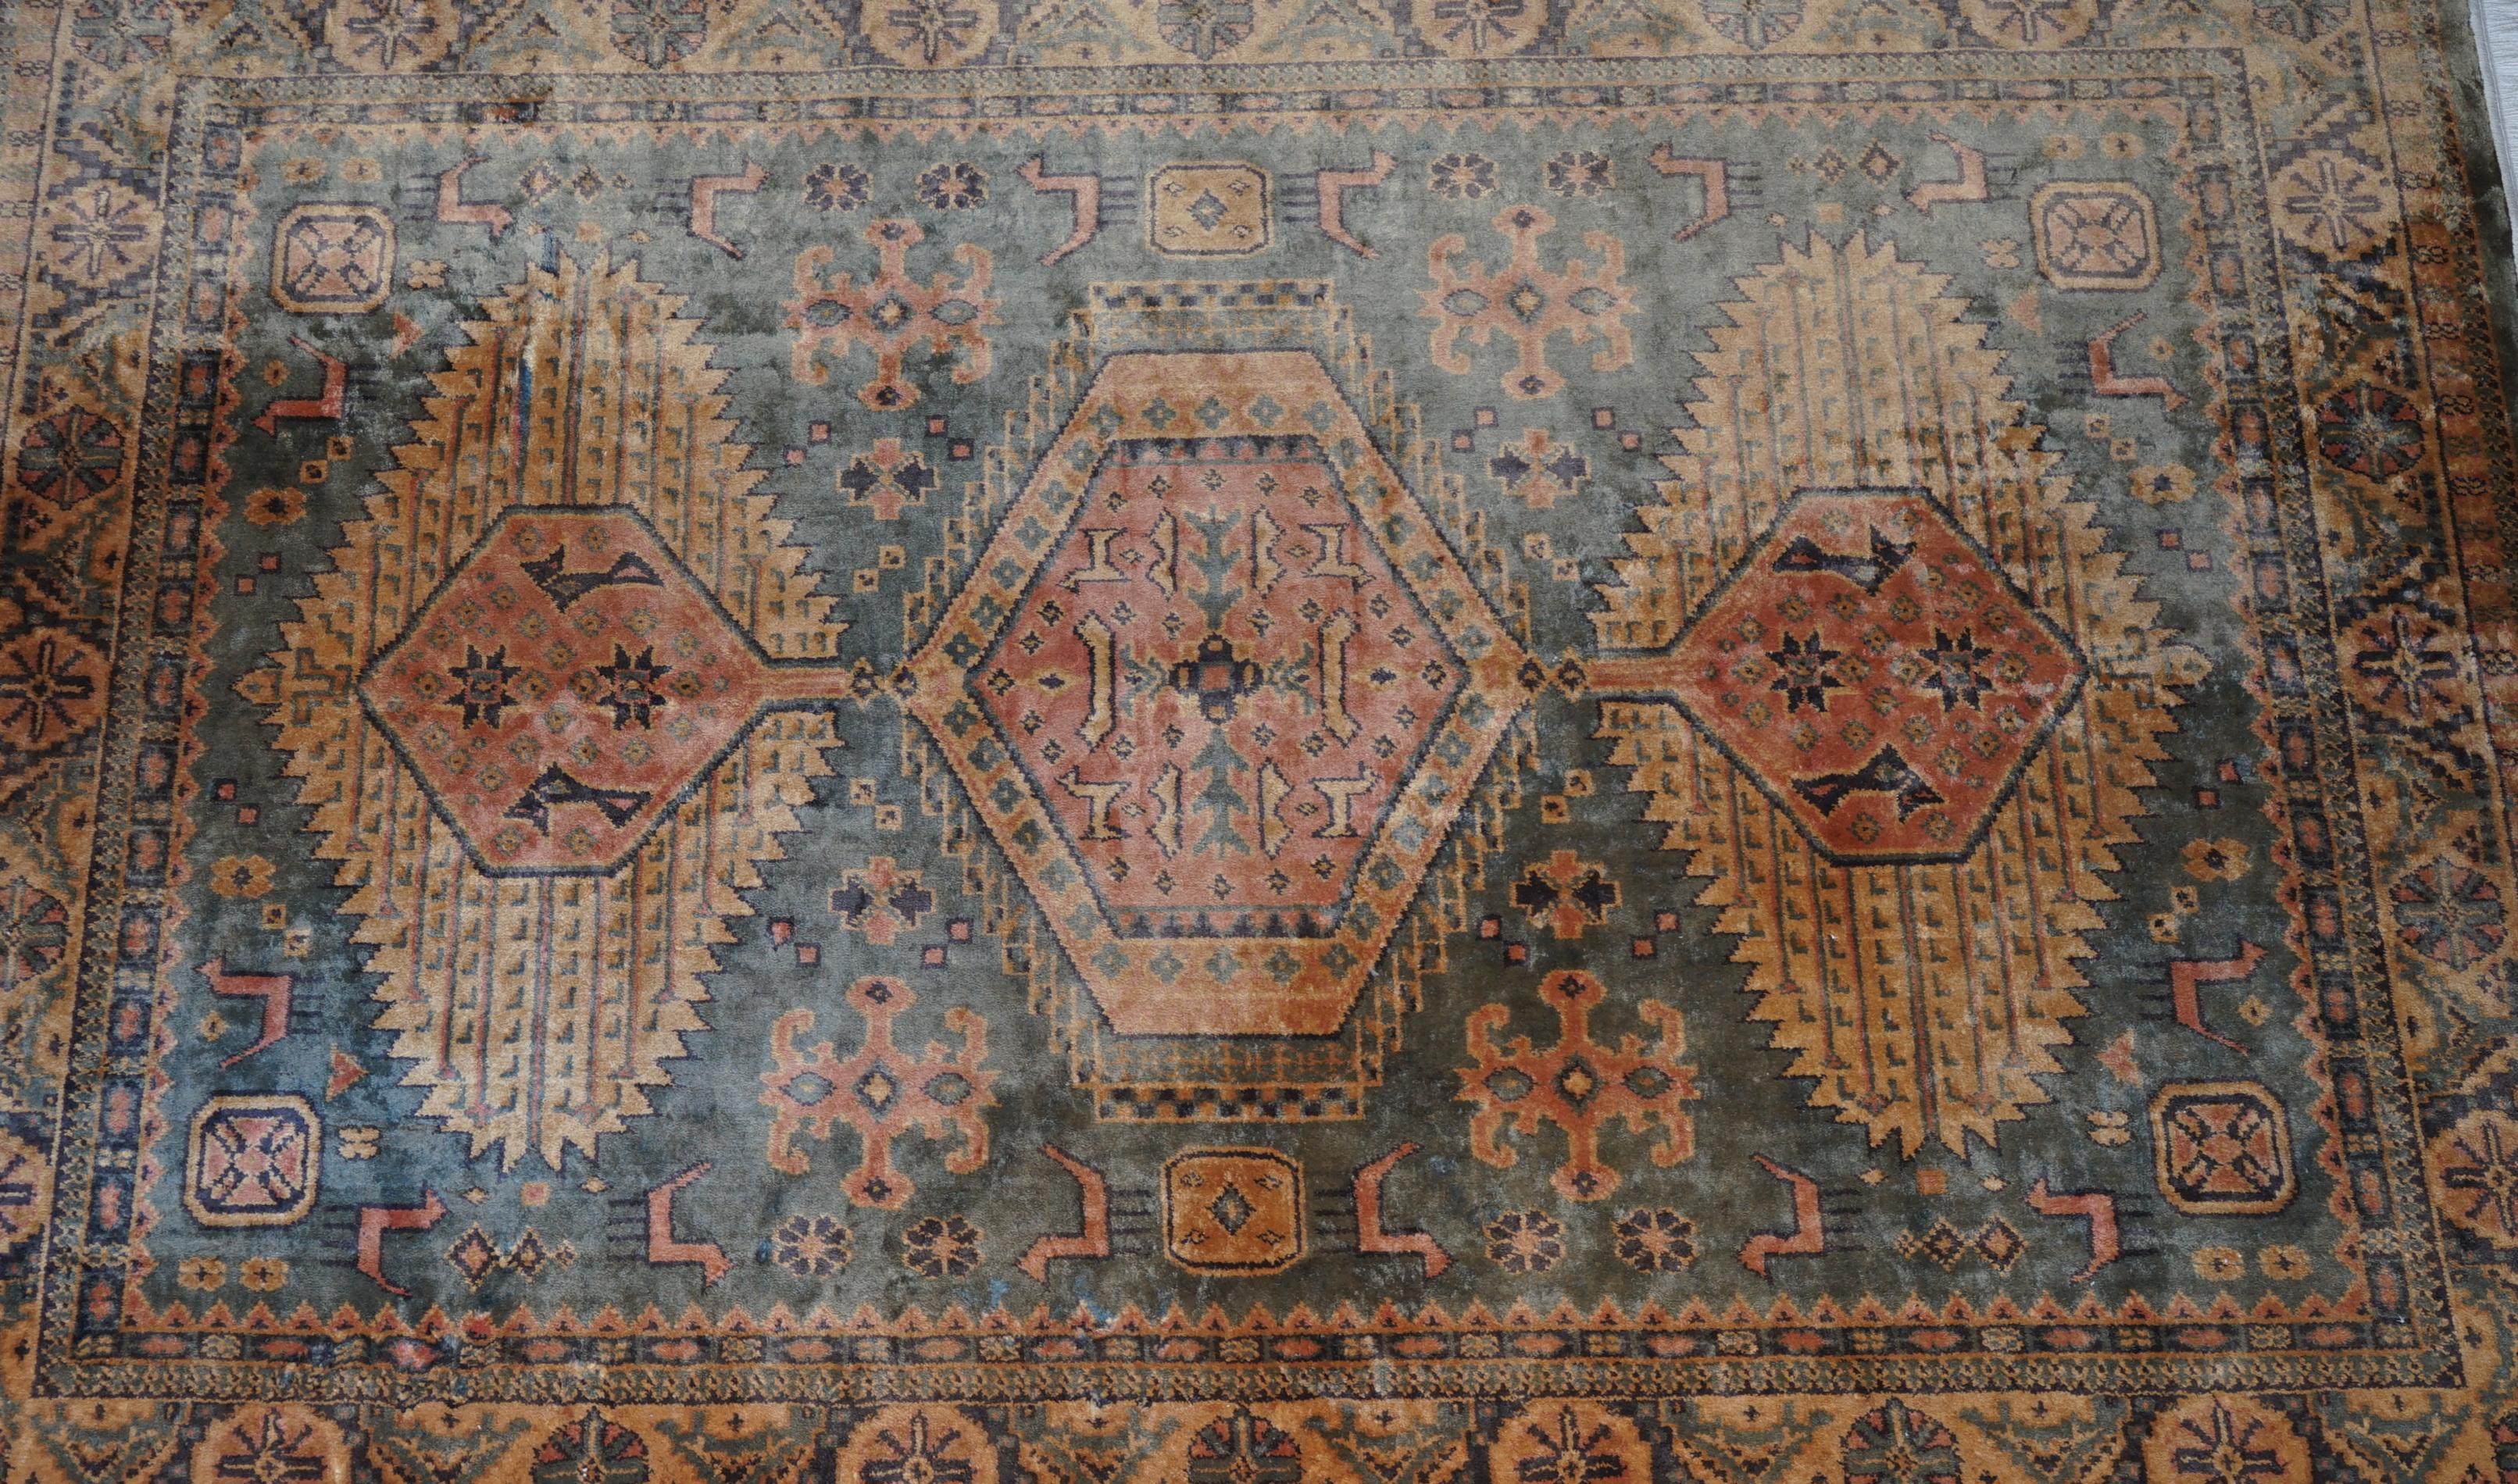 Hand-Crafted Large French Antique Aztek Kilim Style Rug / Carpet Very Nicely Aged For Sale